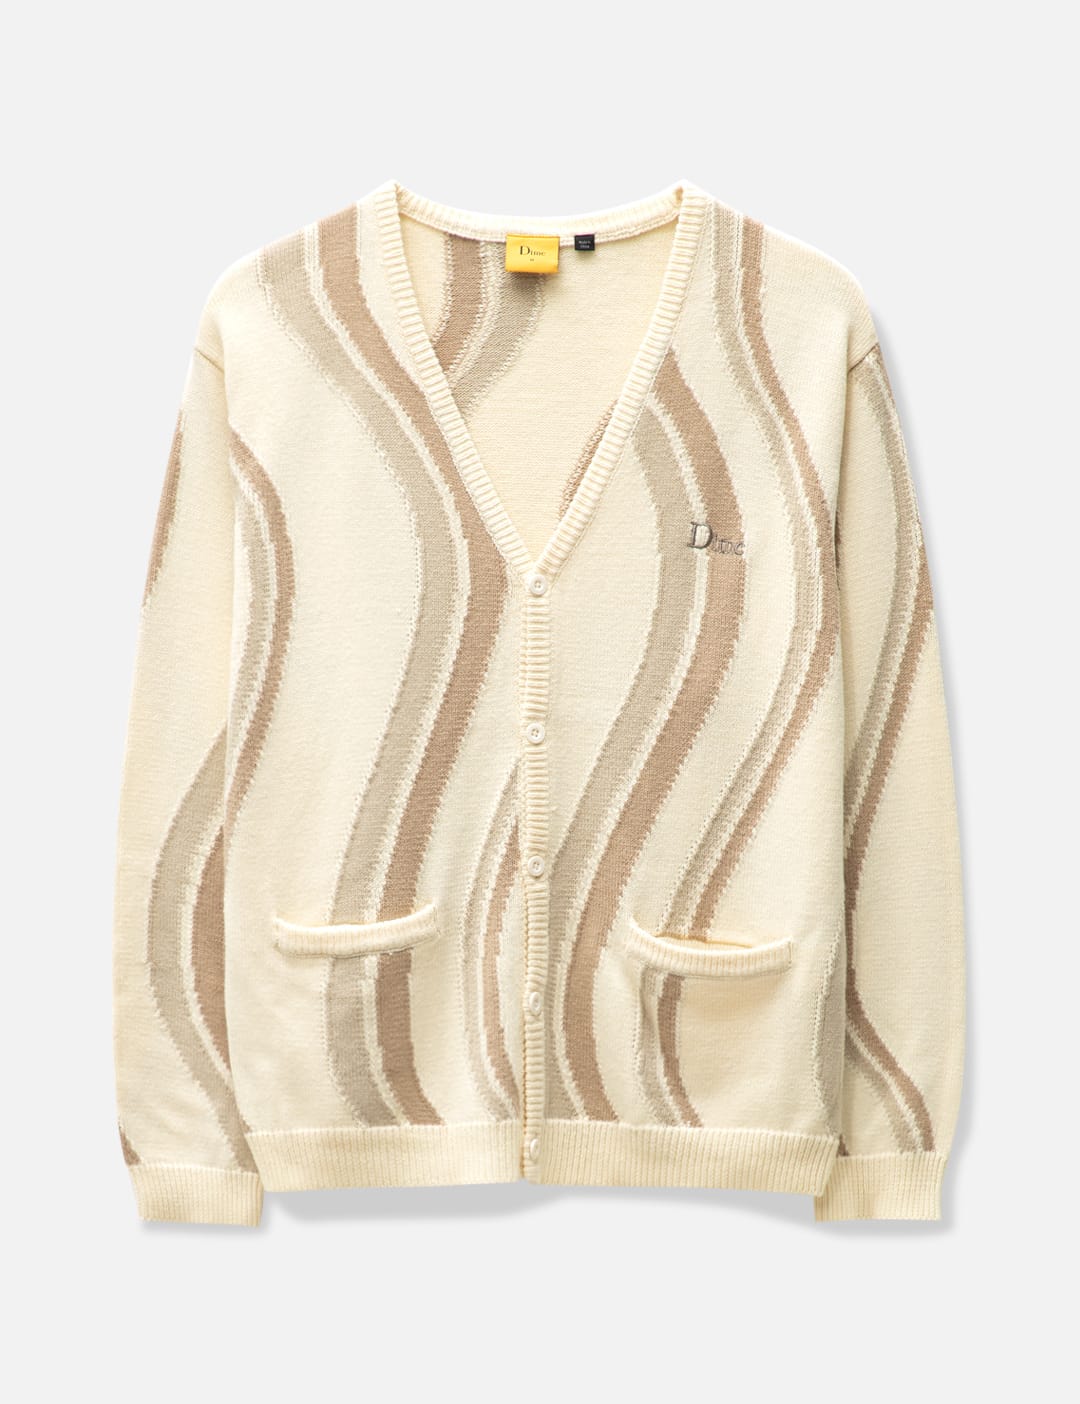 Dime - Lightwave Knit Cardigan | HBX - Globally Curated Fashion